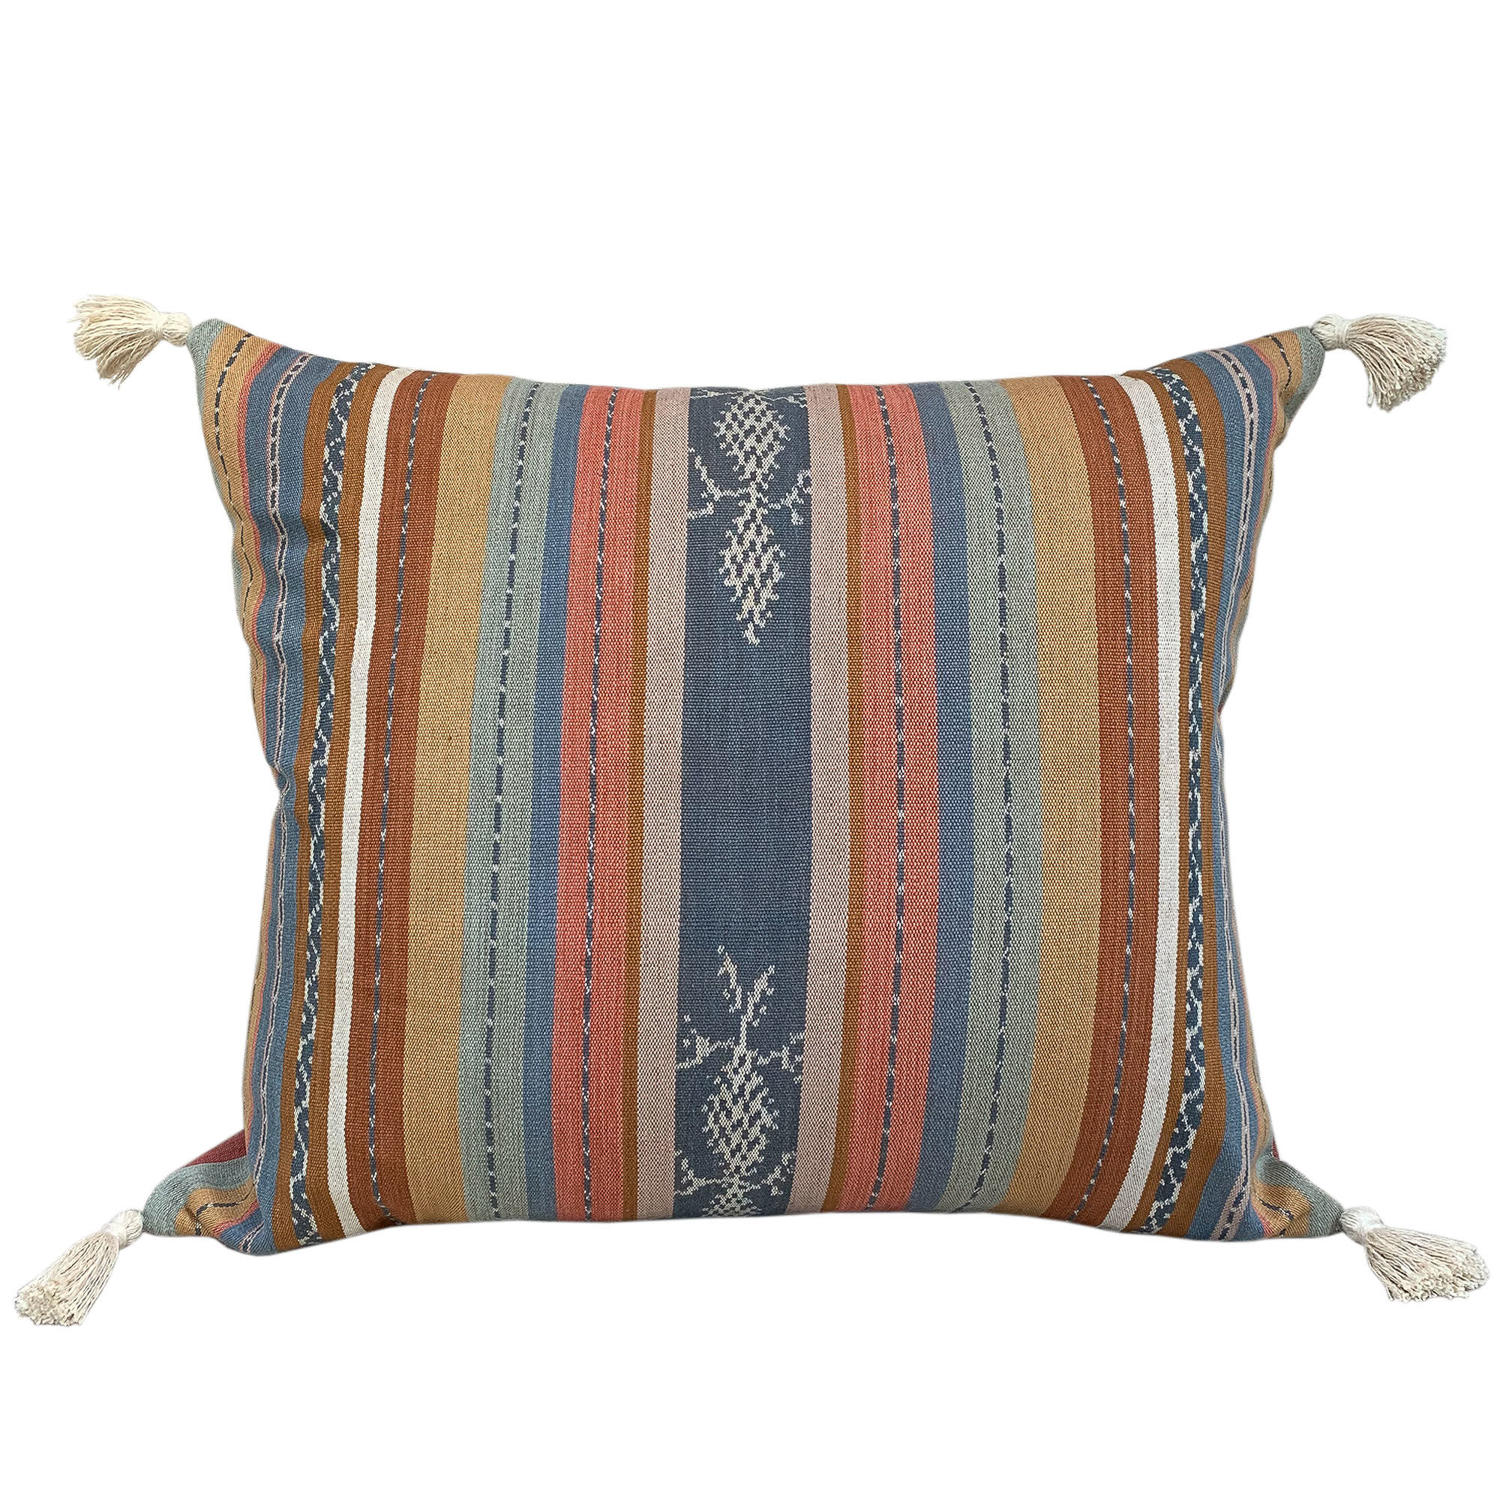 Flores ikat cushions with tassels